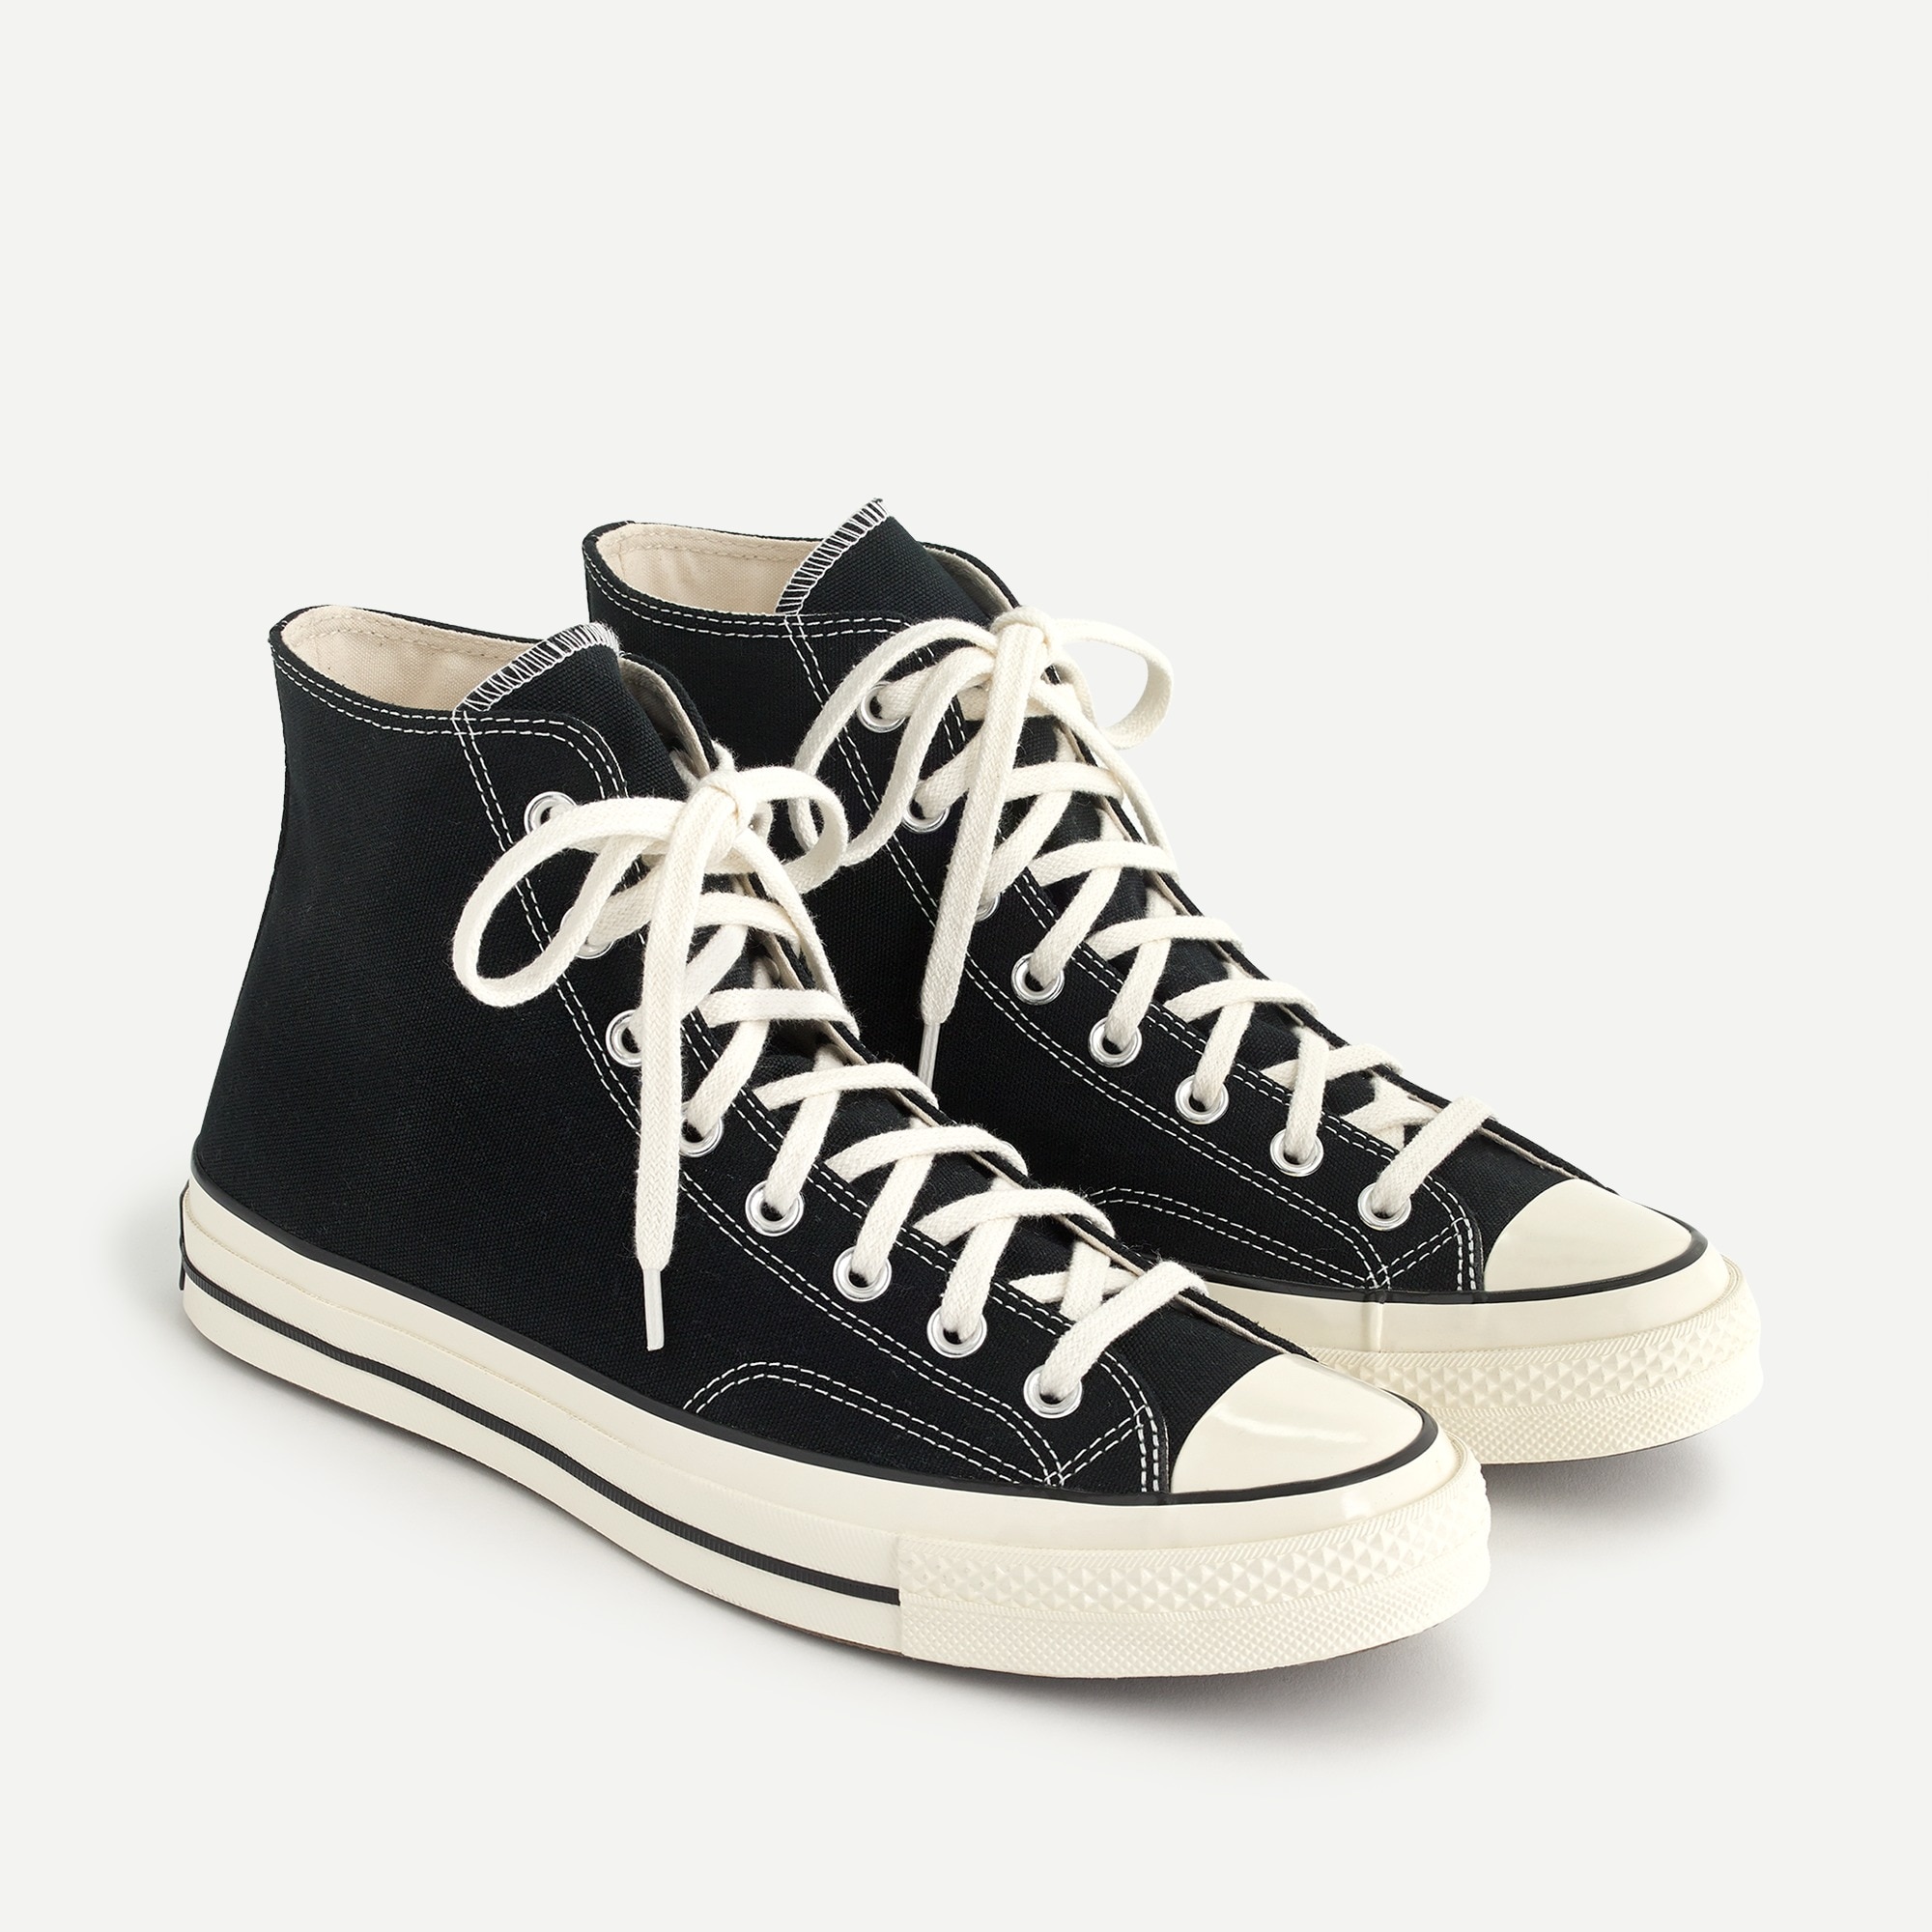 converse high top sneakers